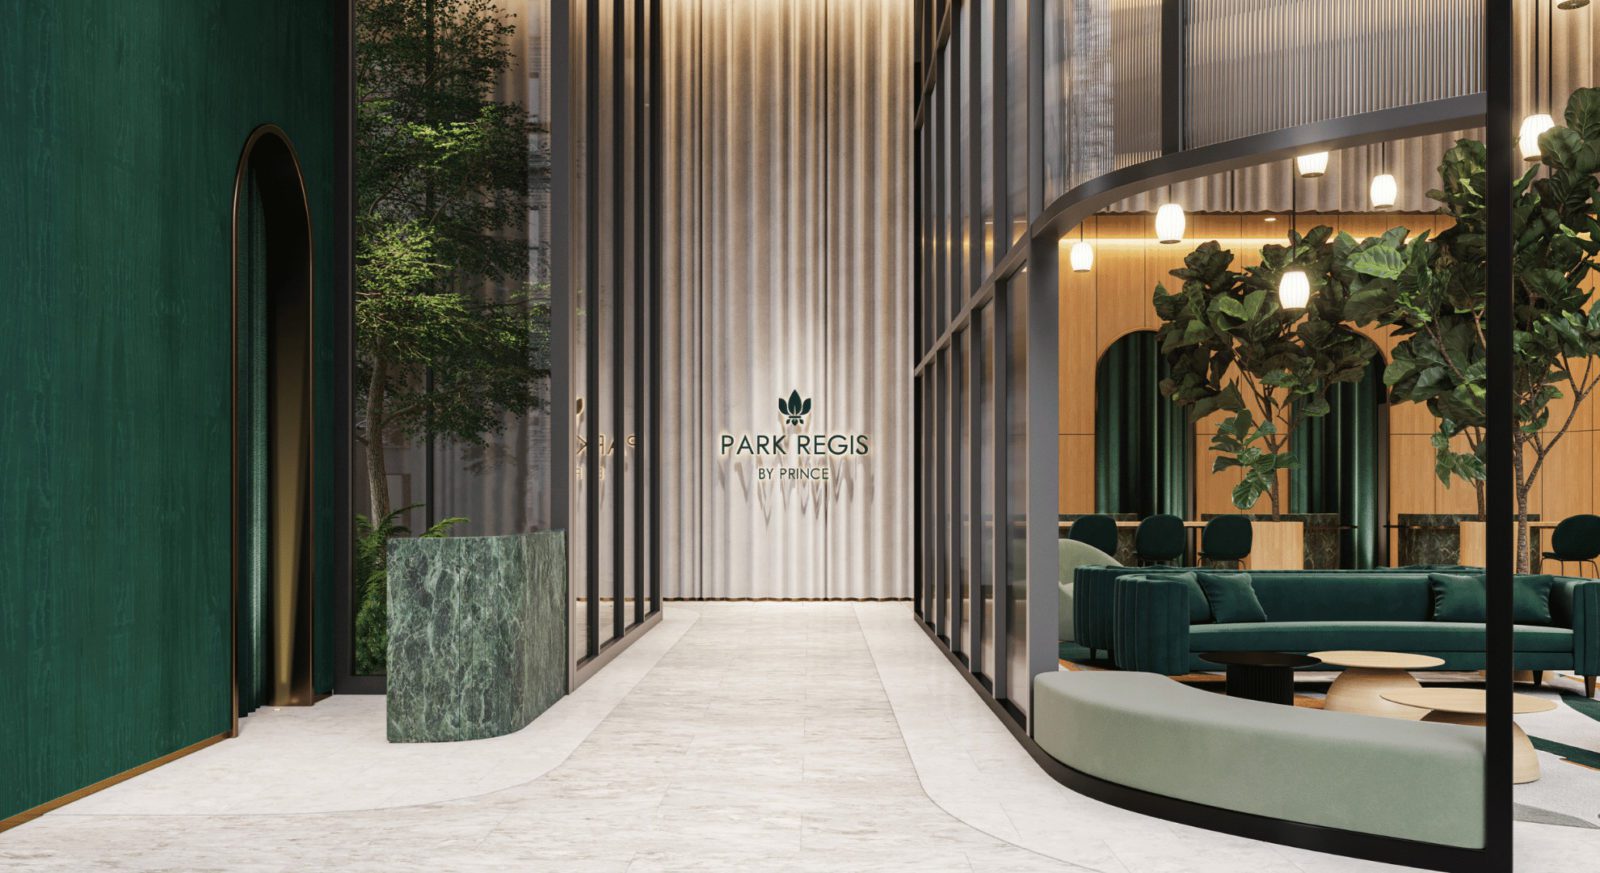 StayWell Announces a New Hotel Brand Launch, Park Regis by Prince